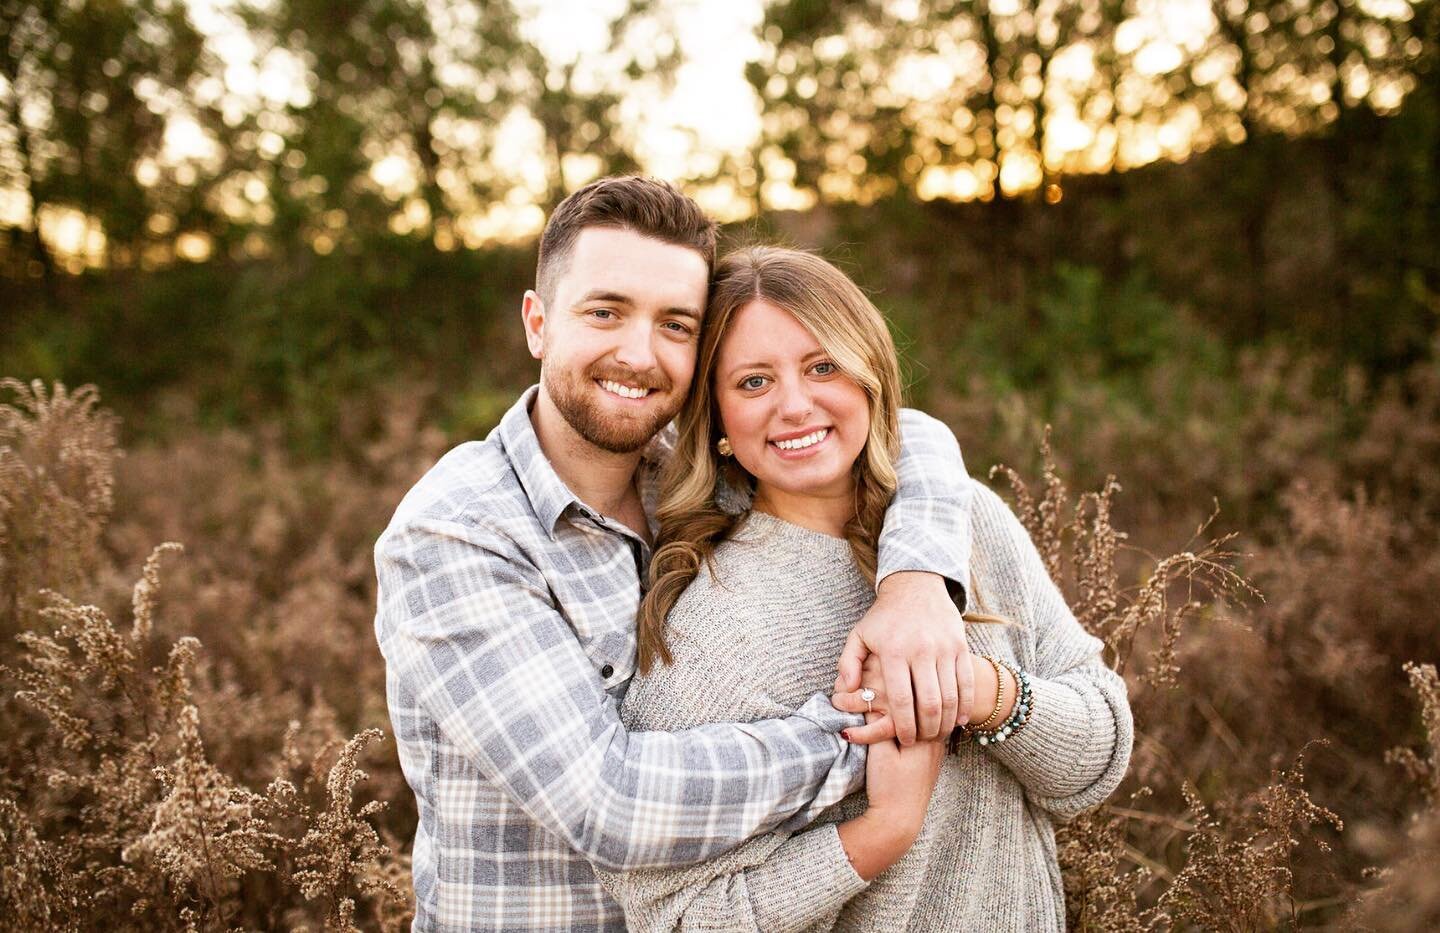 It&rsquo;s only Tuesday and I&rsquo;ve got a busy week!! Here&rsquo;s to flying through the week and enjoying the weekend with family &amp; friends!!! Whose with me?!
.
.
.
.
.
##Engagement #engagmentpics #engagedcouple #shesaidyes #photo #portrait #